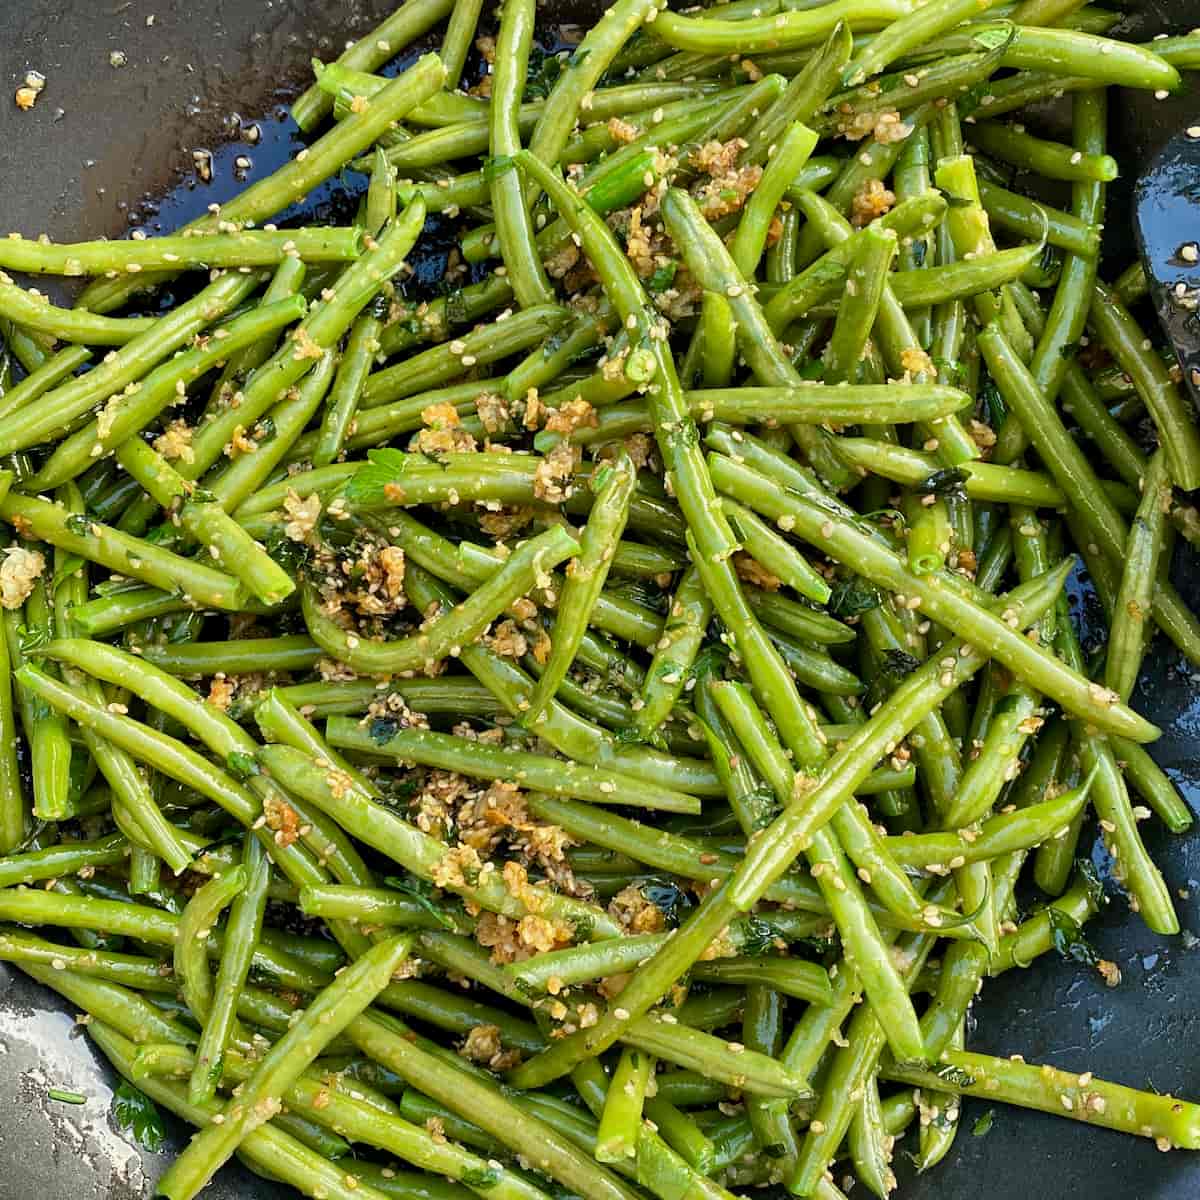 french style sauteed green beans tossed in toasted breadcrumbs, garlic and herbs